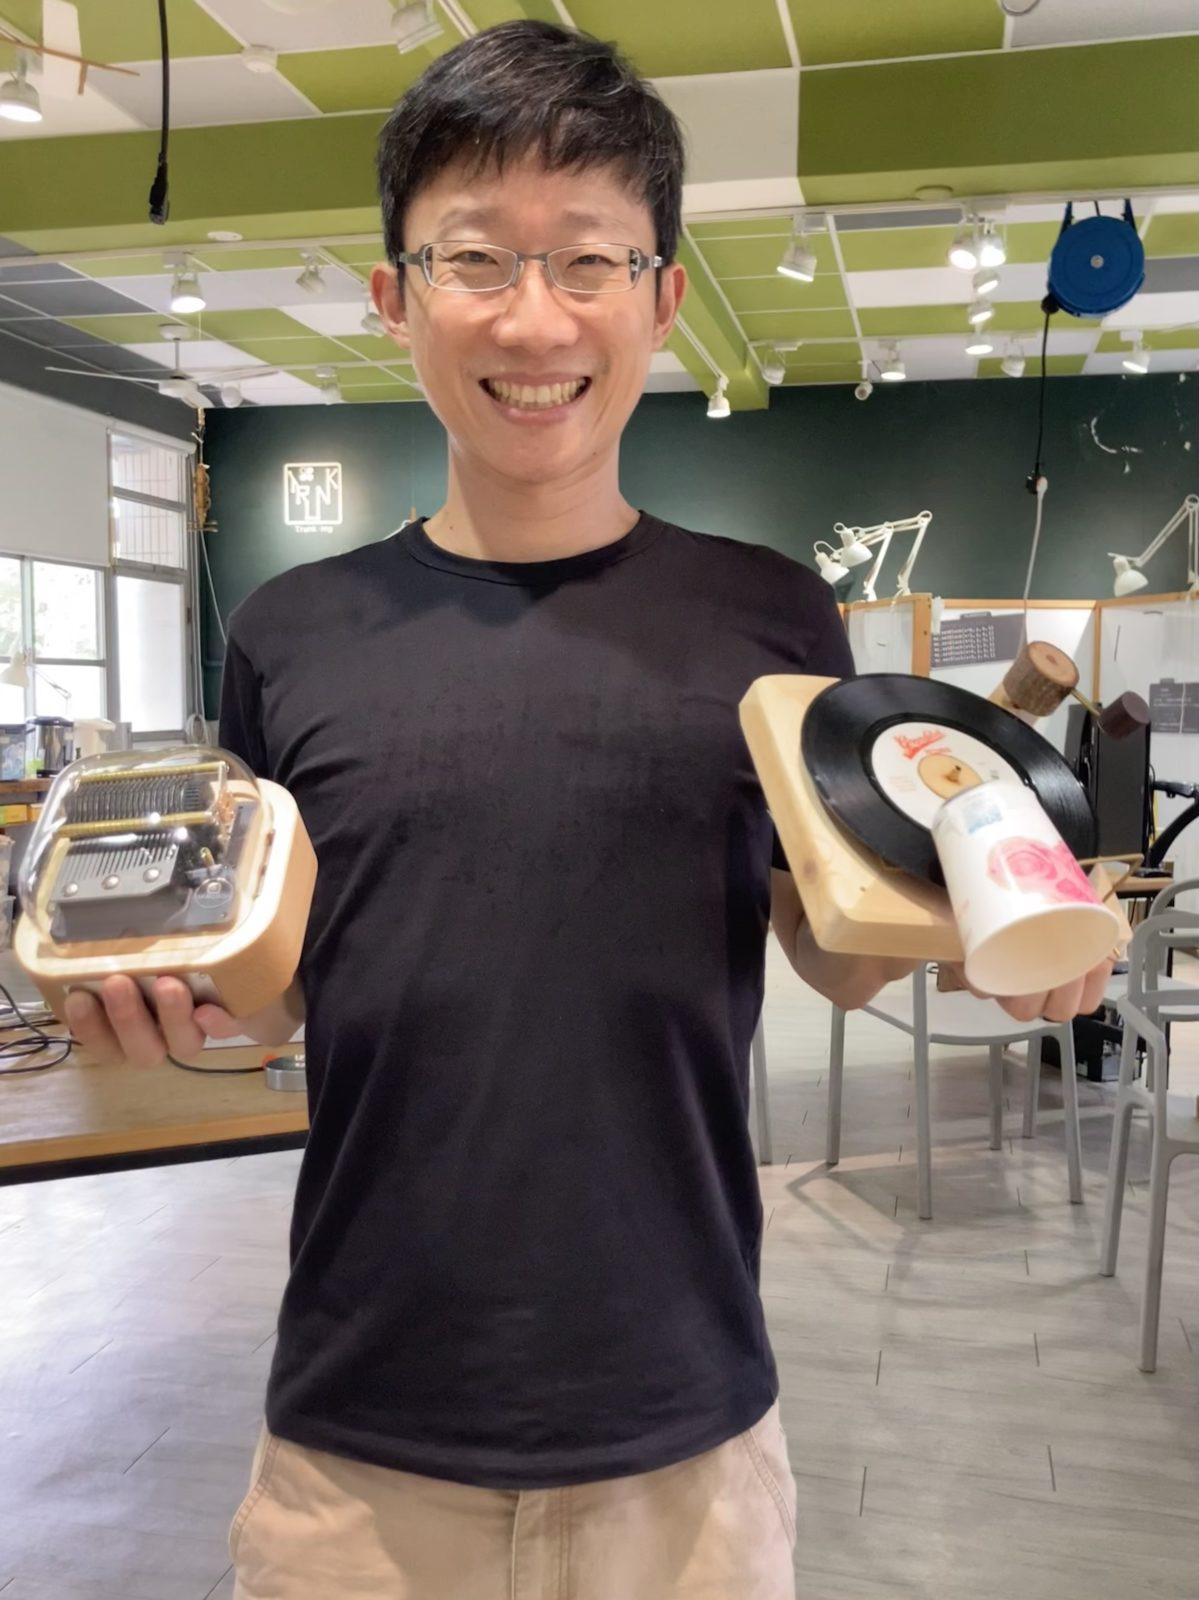 Teacher Wang works in a Nanshin Junior High School in Tainan City, and he is in charge of the course design in its tech center to develop some new courses in the music theme.